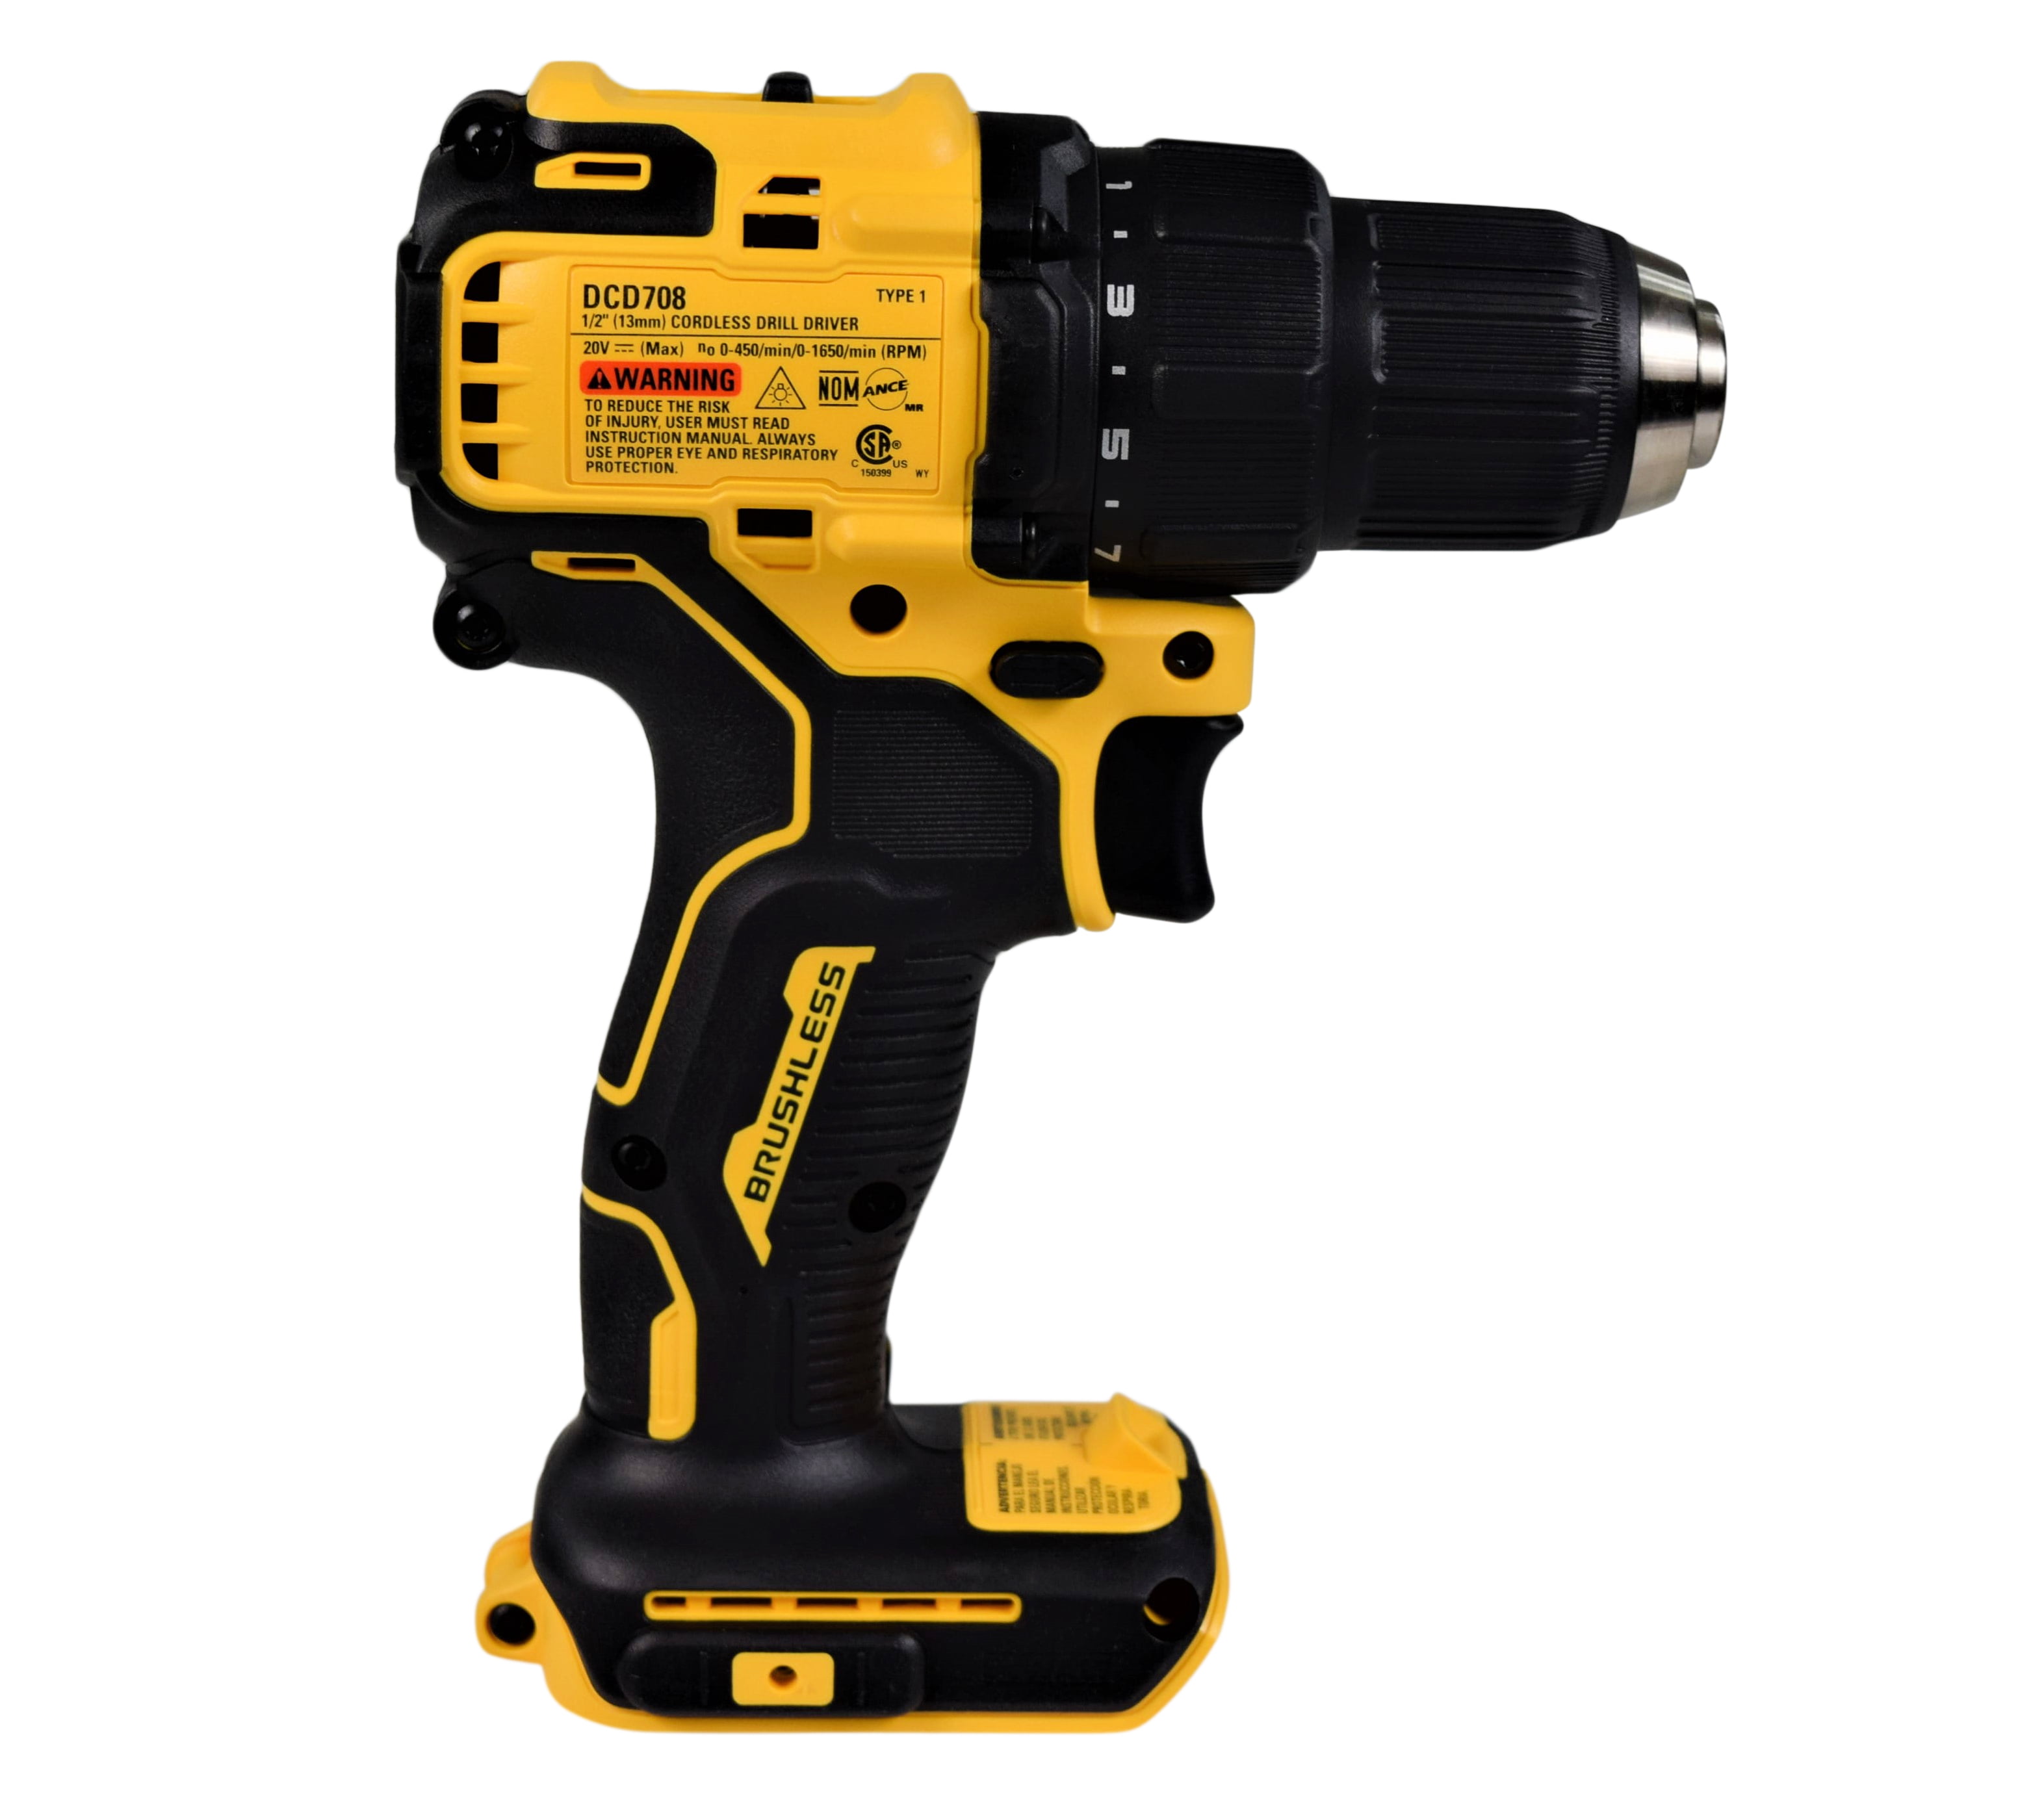 20V Brushless Cordless 1/2 in. Drill/Driver - Tool Only